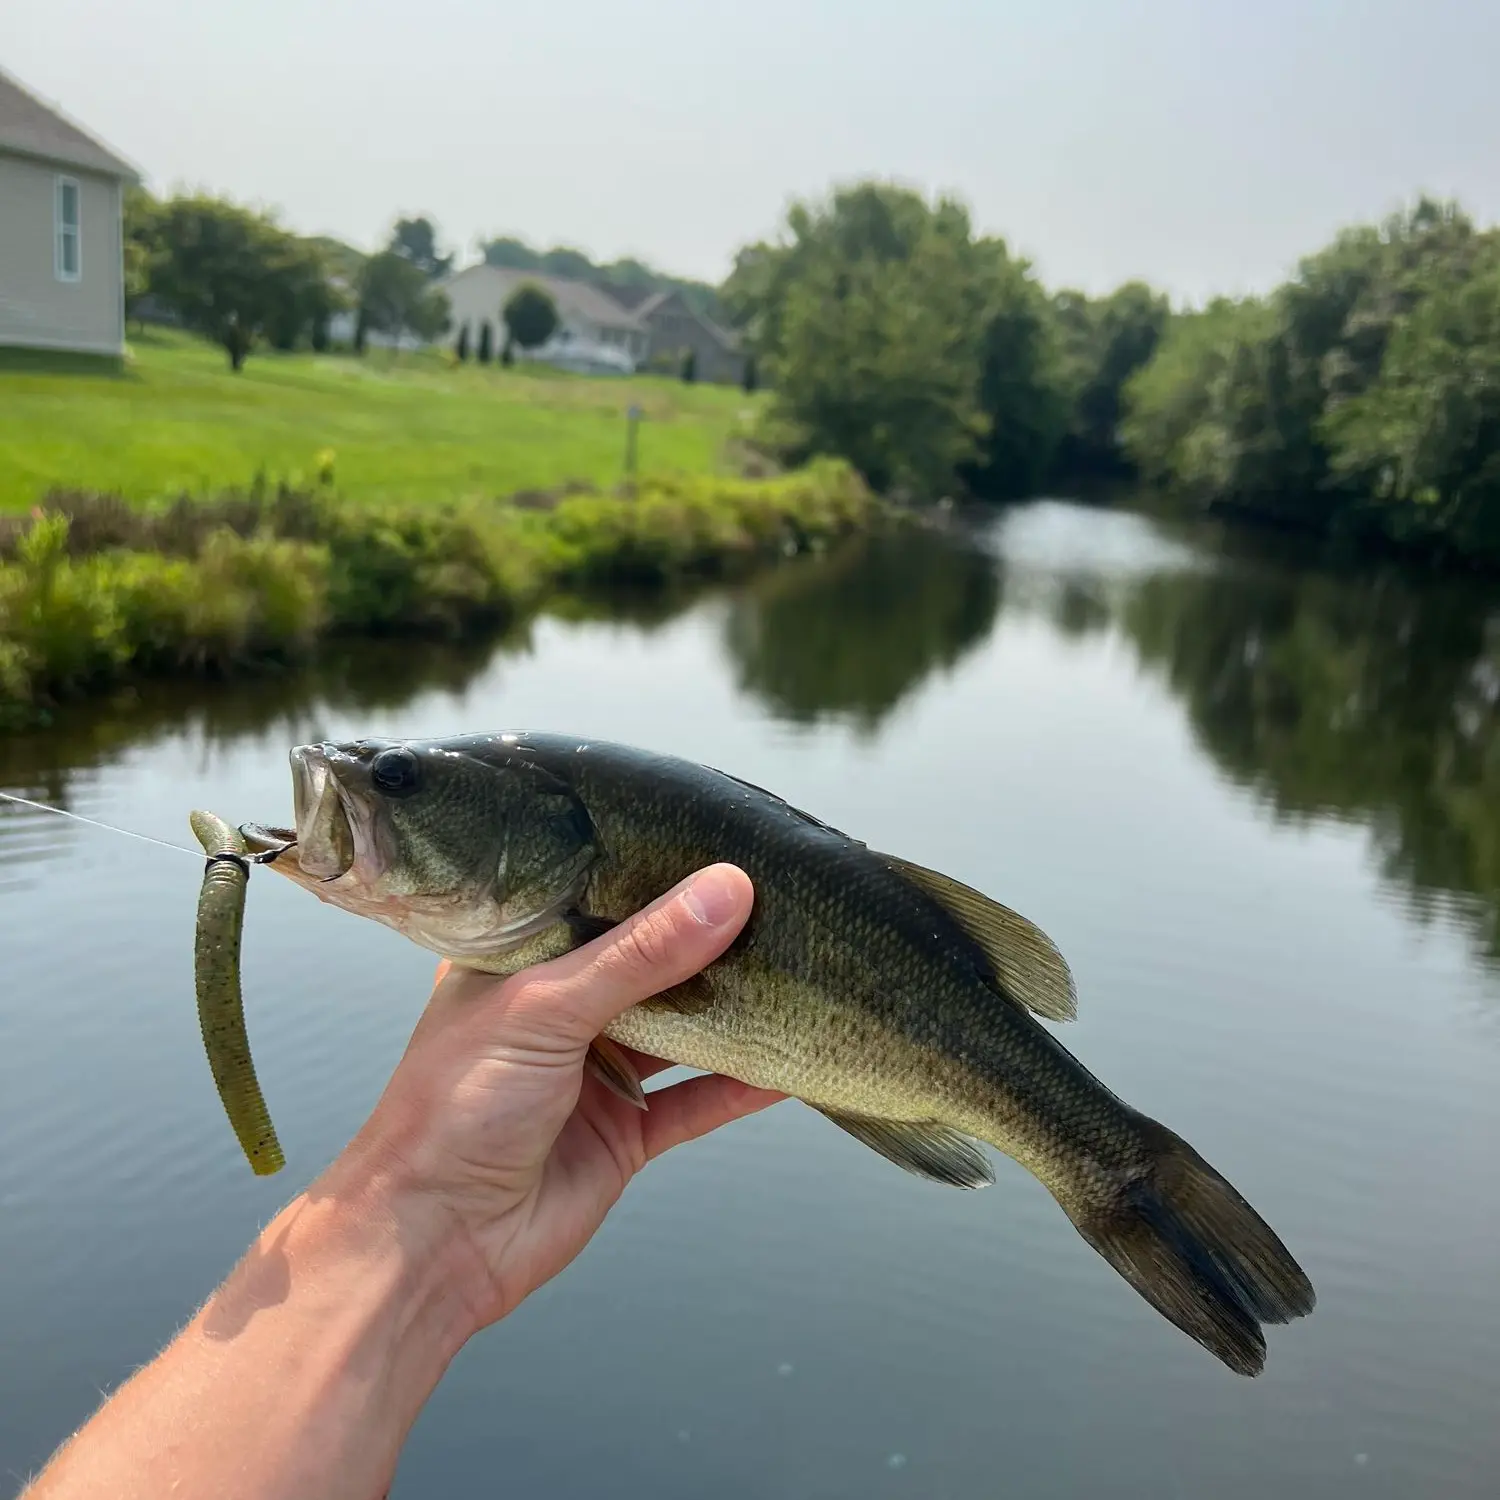 ᐅ Derby Pond fishing reports🎣• Dover, DE (United States) fishing